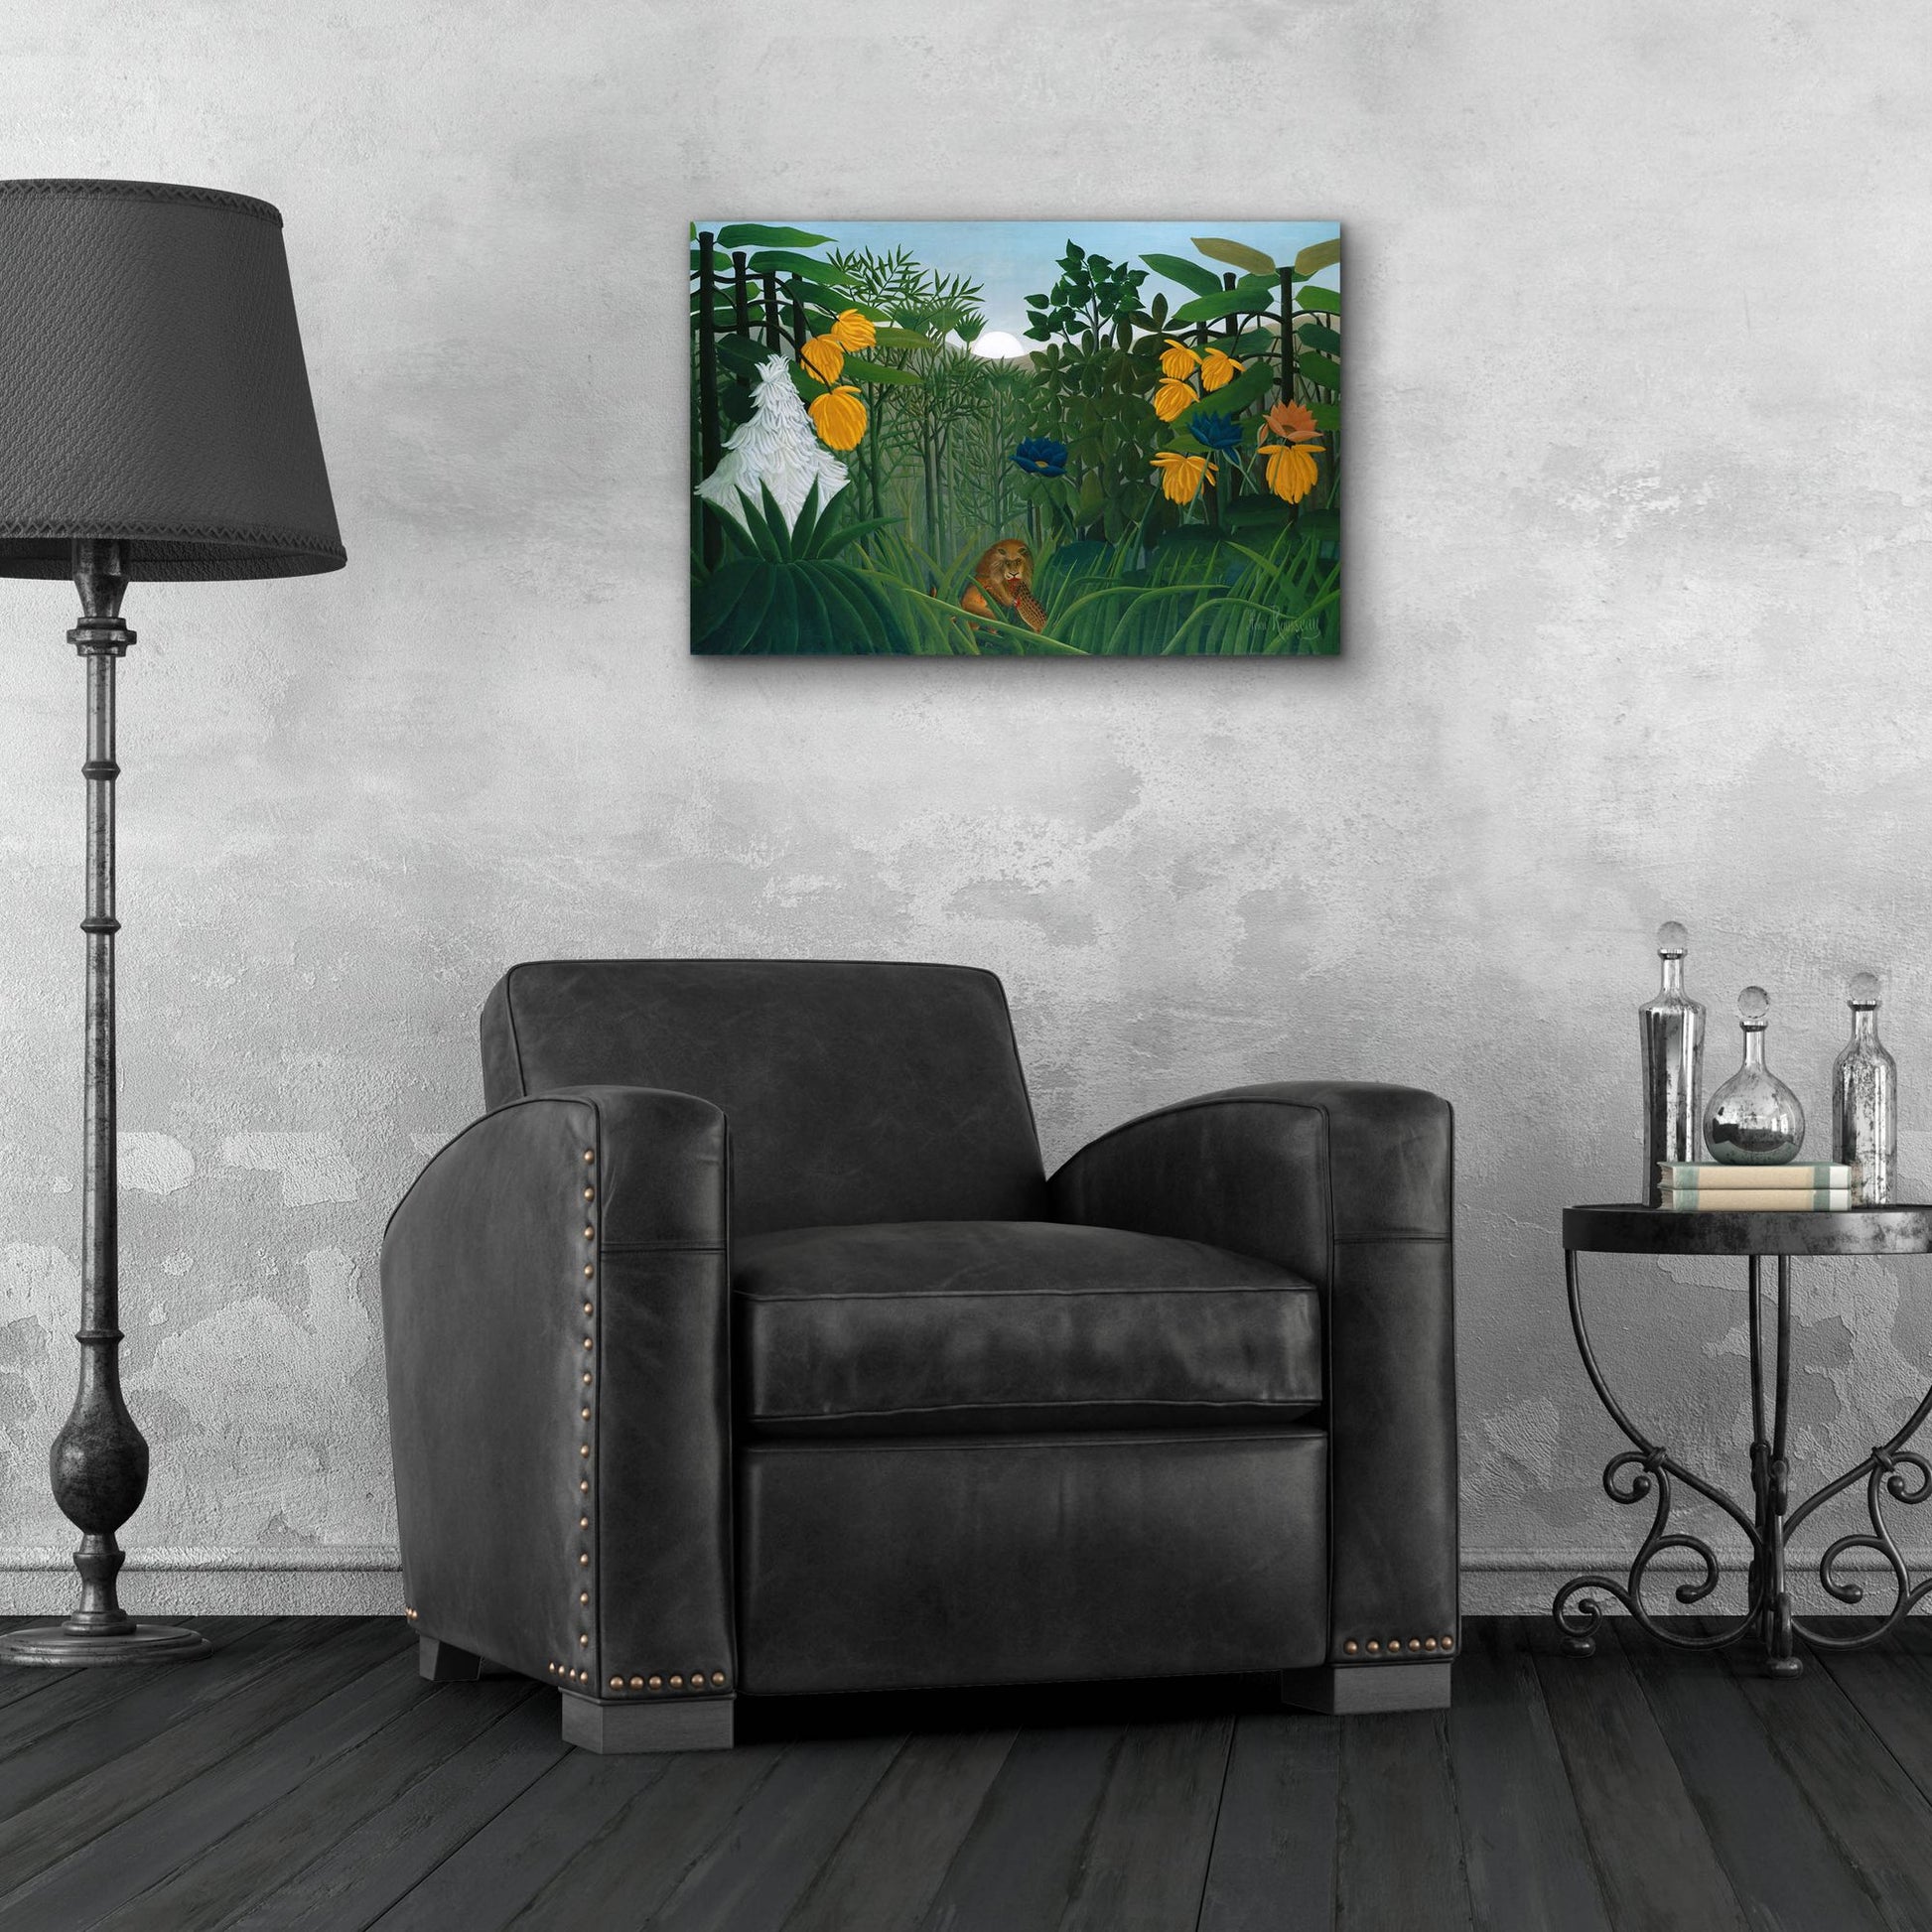 Epic Art ' The Repast of the Lion, 1907' by Henri Rousseau, Acrylic Glass Wall Art,24x16